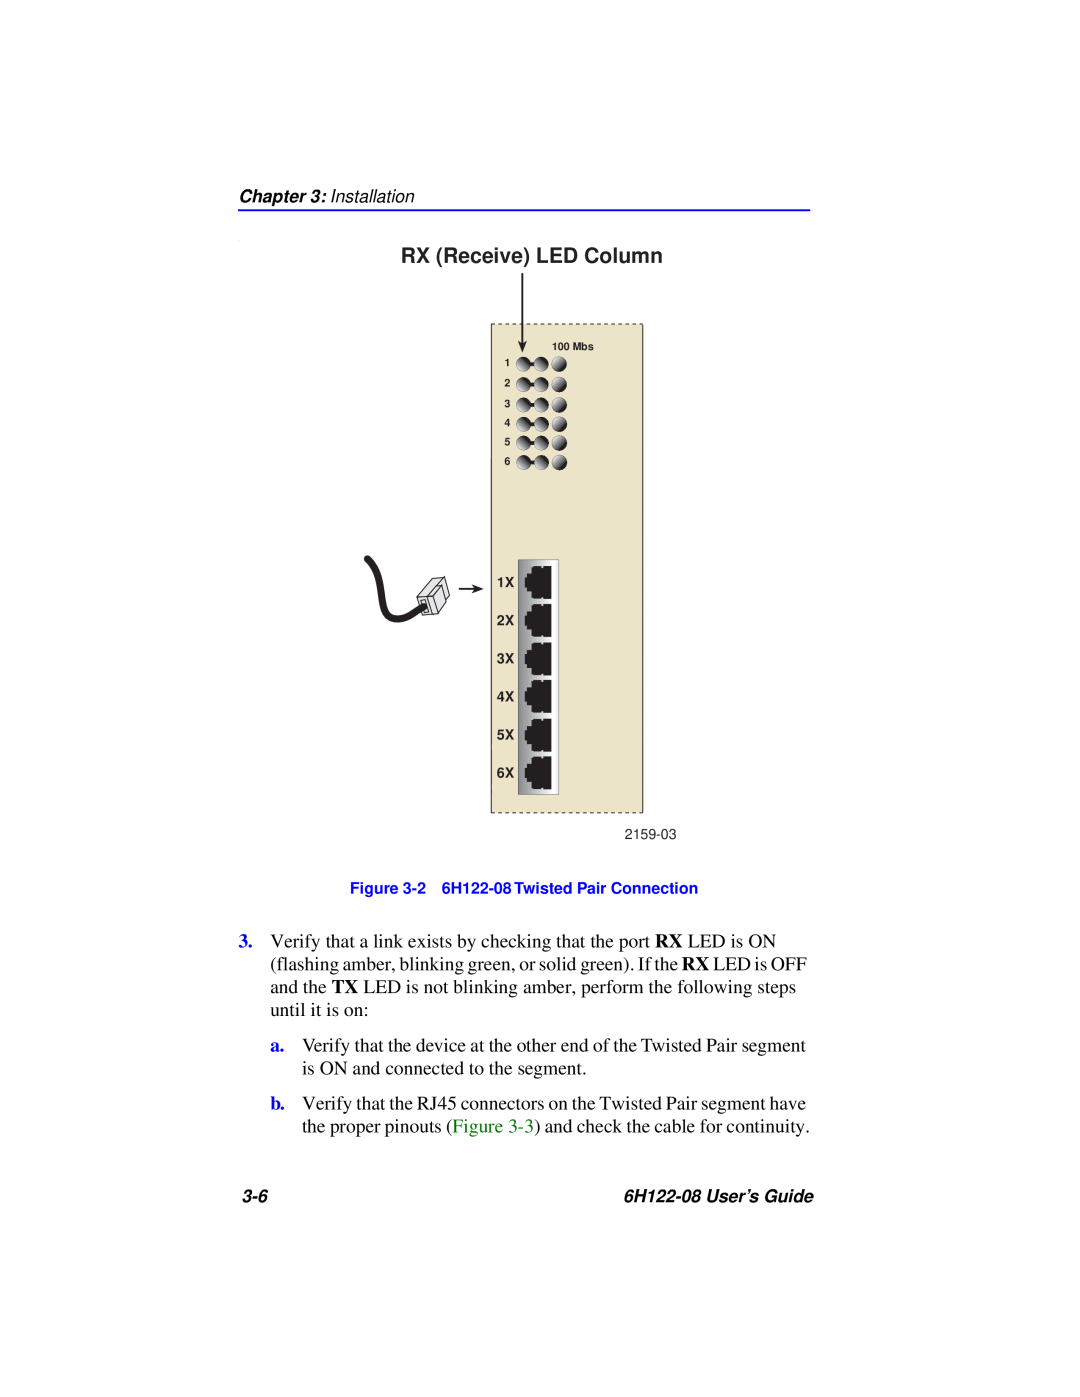 Cabletron Systems manual RX Receive LED Column, 2 6H122-08 Twisted Pair Connection 